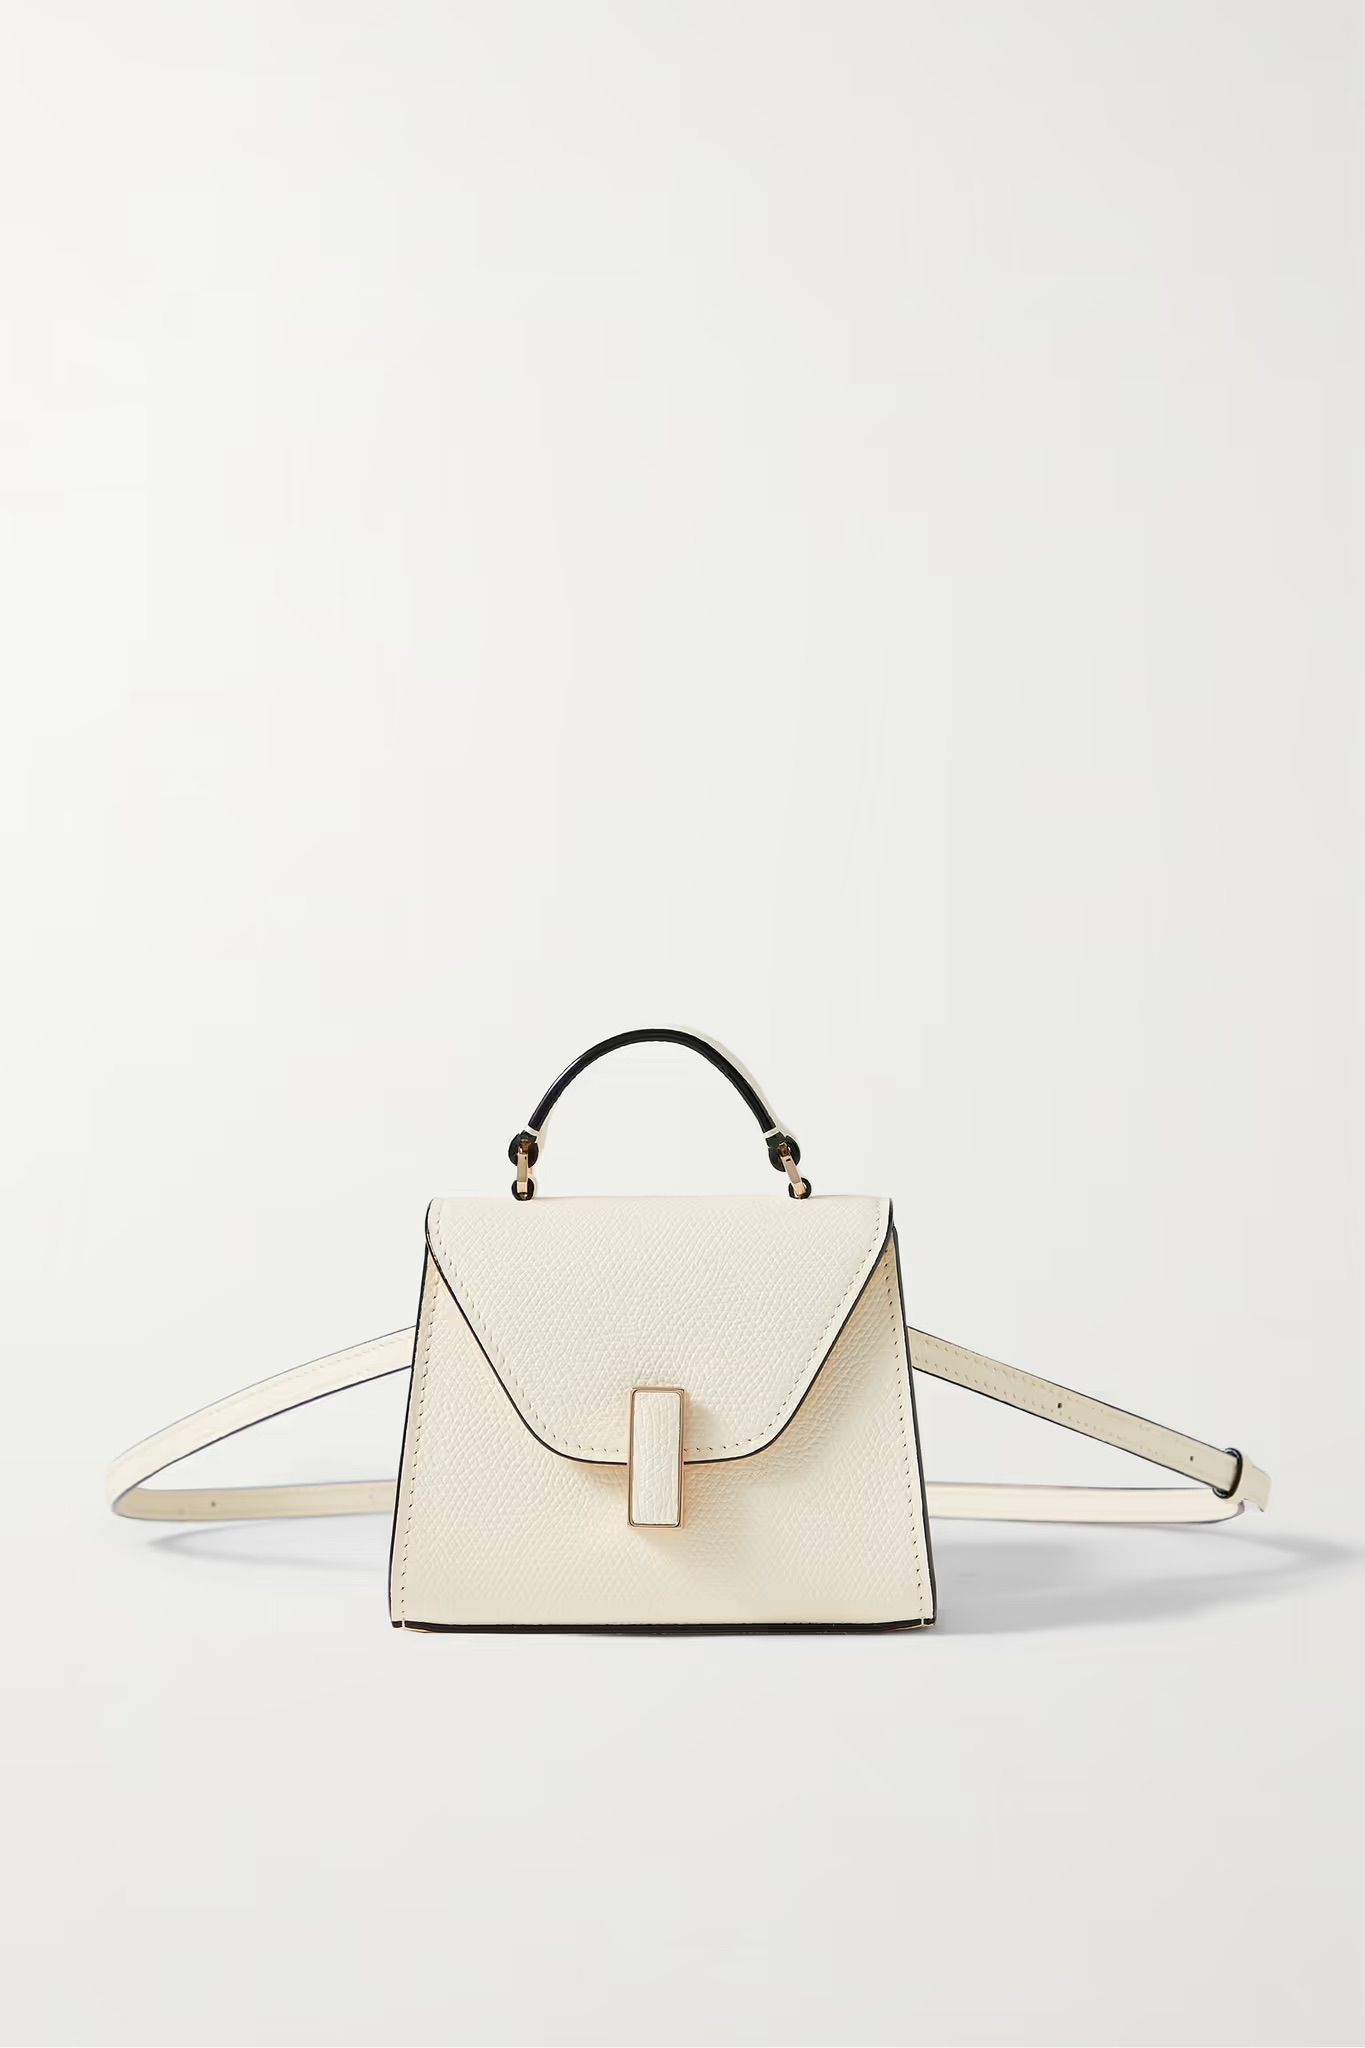 <p><strong>$1350.00</strong></p><p>This style is two-in-one. A mini top-handle bag is laced through a thin belt, for a stylish approach to the micro bag trend. Store your credit cards, keys and little necessities in this stylish option in bold cream. Belt it over a ruched, body con dress for a night out or a boyfriend blazer for a daytime approach. </p><p><strong>Size:</strong> 2.4 "D x 3.9 "H x 4.7 "W. Min. Strap Length: 24.8"; Max. Strap Length: 46.9"; Handle Drop: 1.2". </p><p><strong>Material: </strong>Cow Leather </p><p><strong>Colors: </strong>Cream </p>